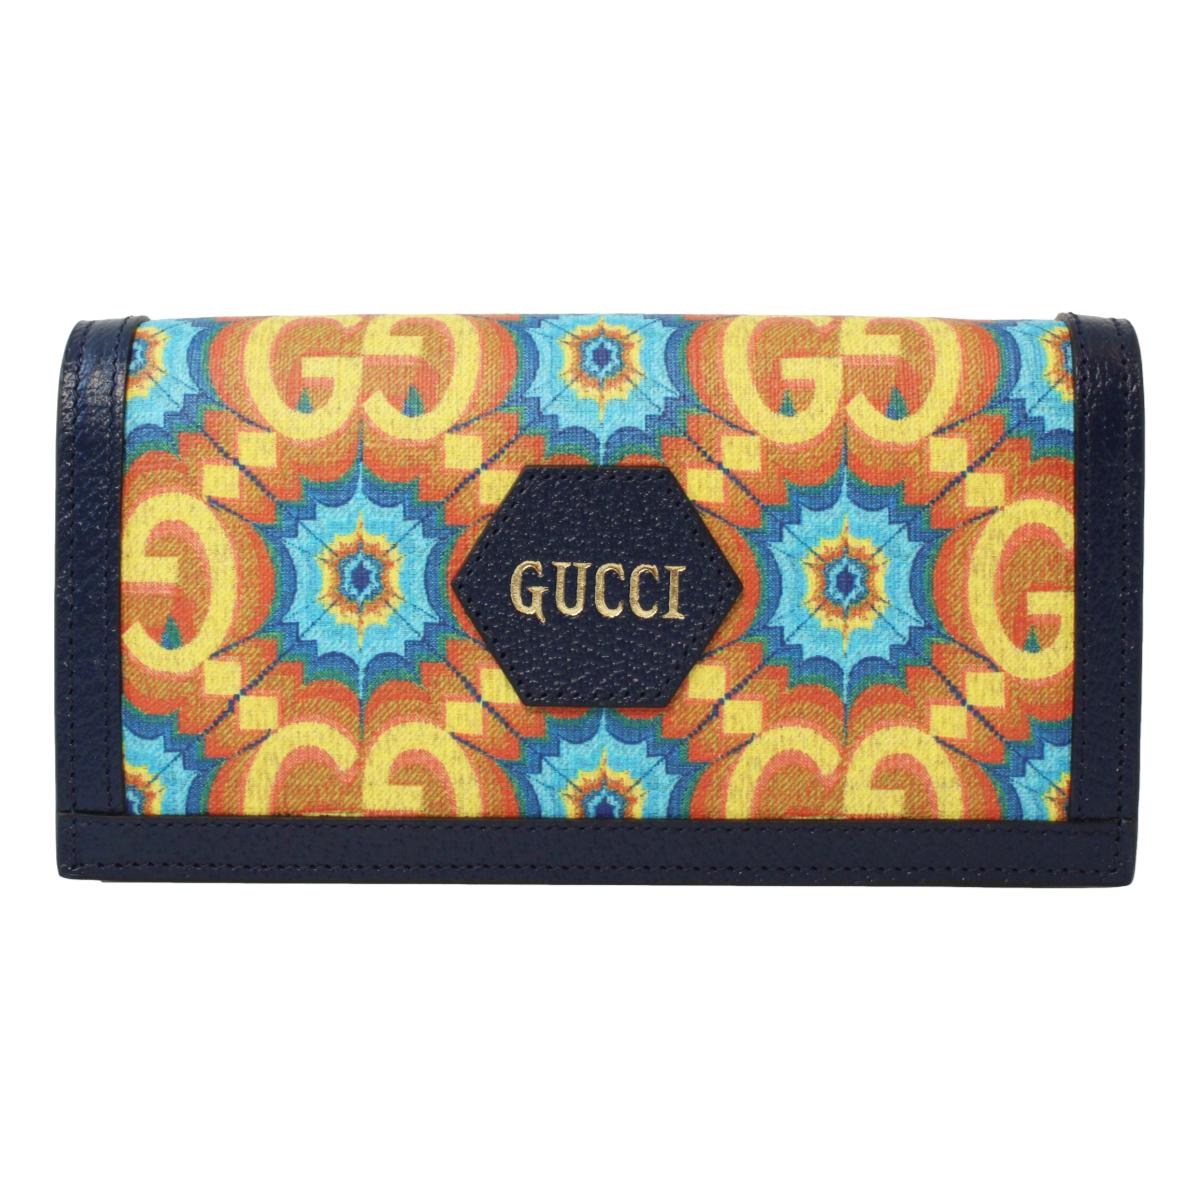 Gucci Centennial GG Kaleidoscope Wallet On Chain Navy Leather 676294 at_Queen_Bee_of_Beverly_Hills